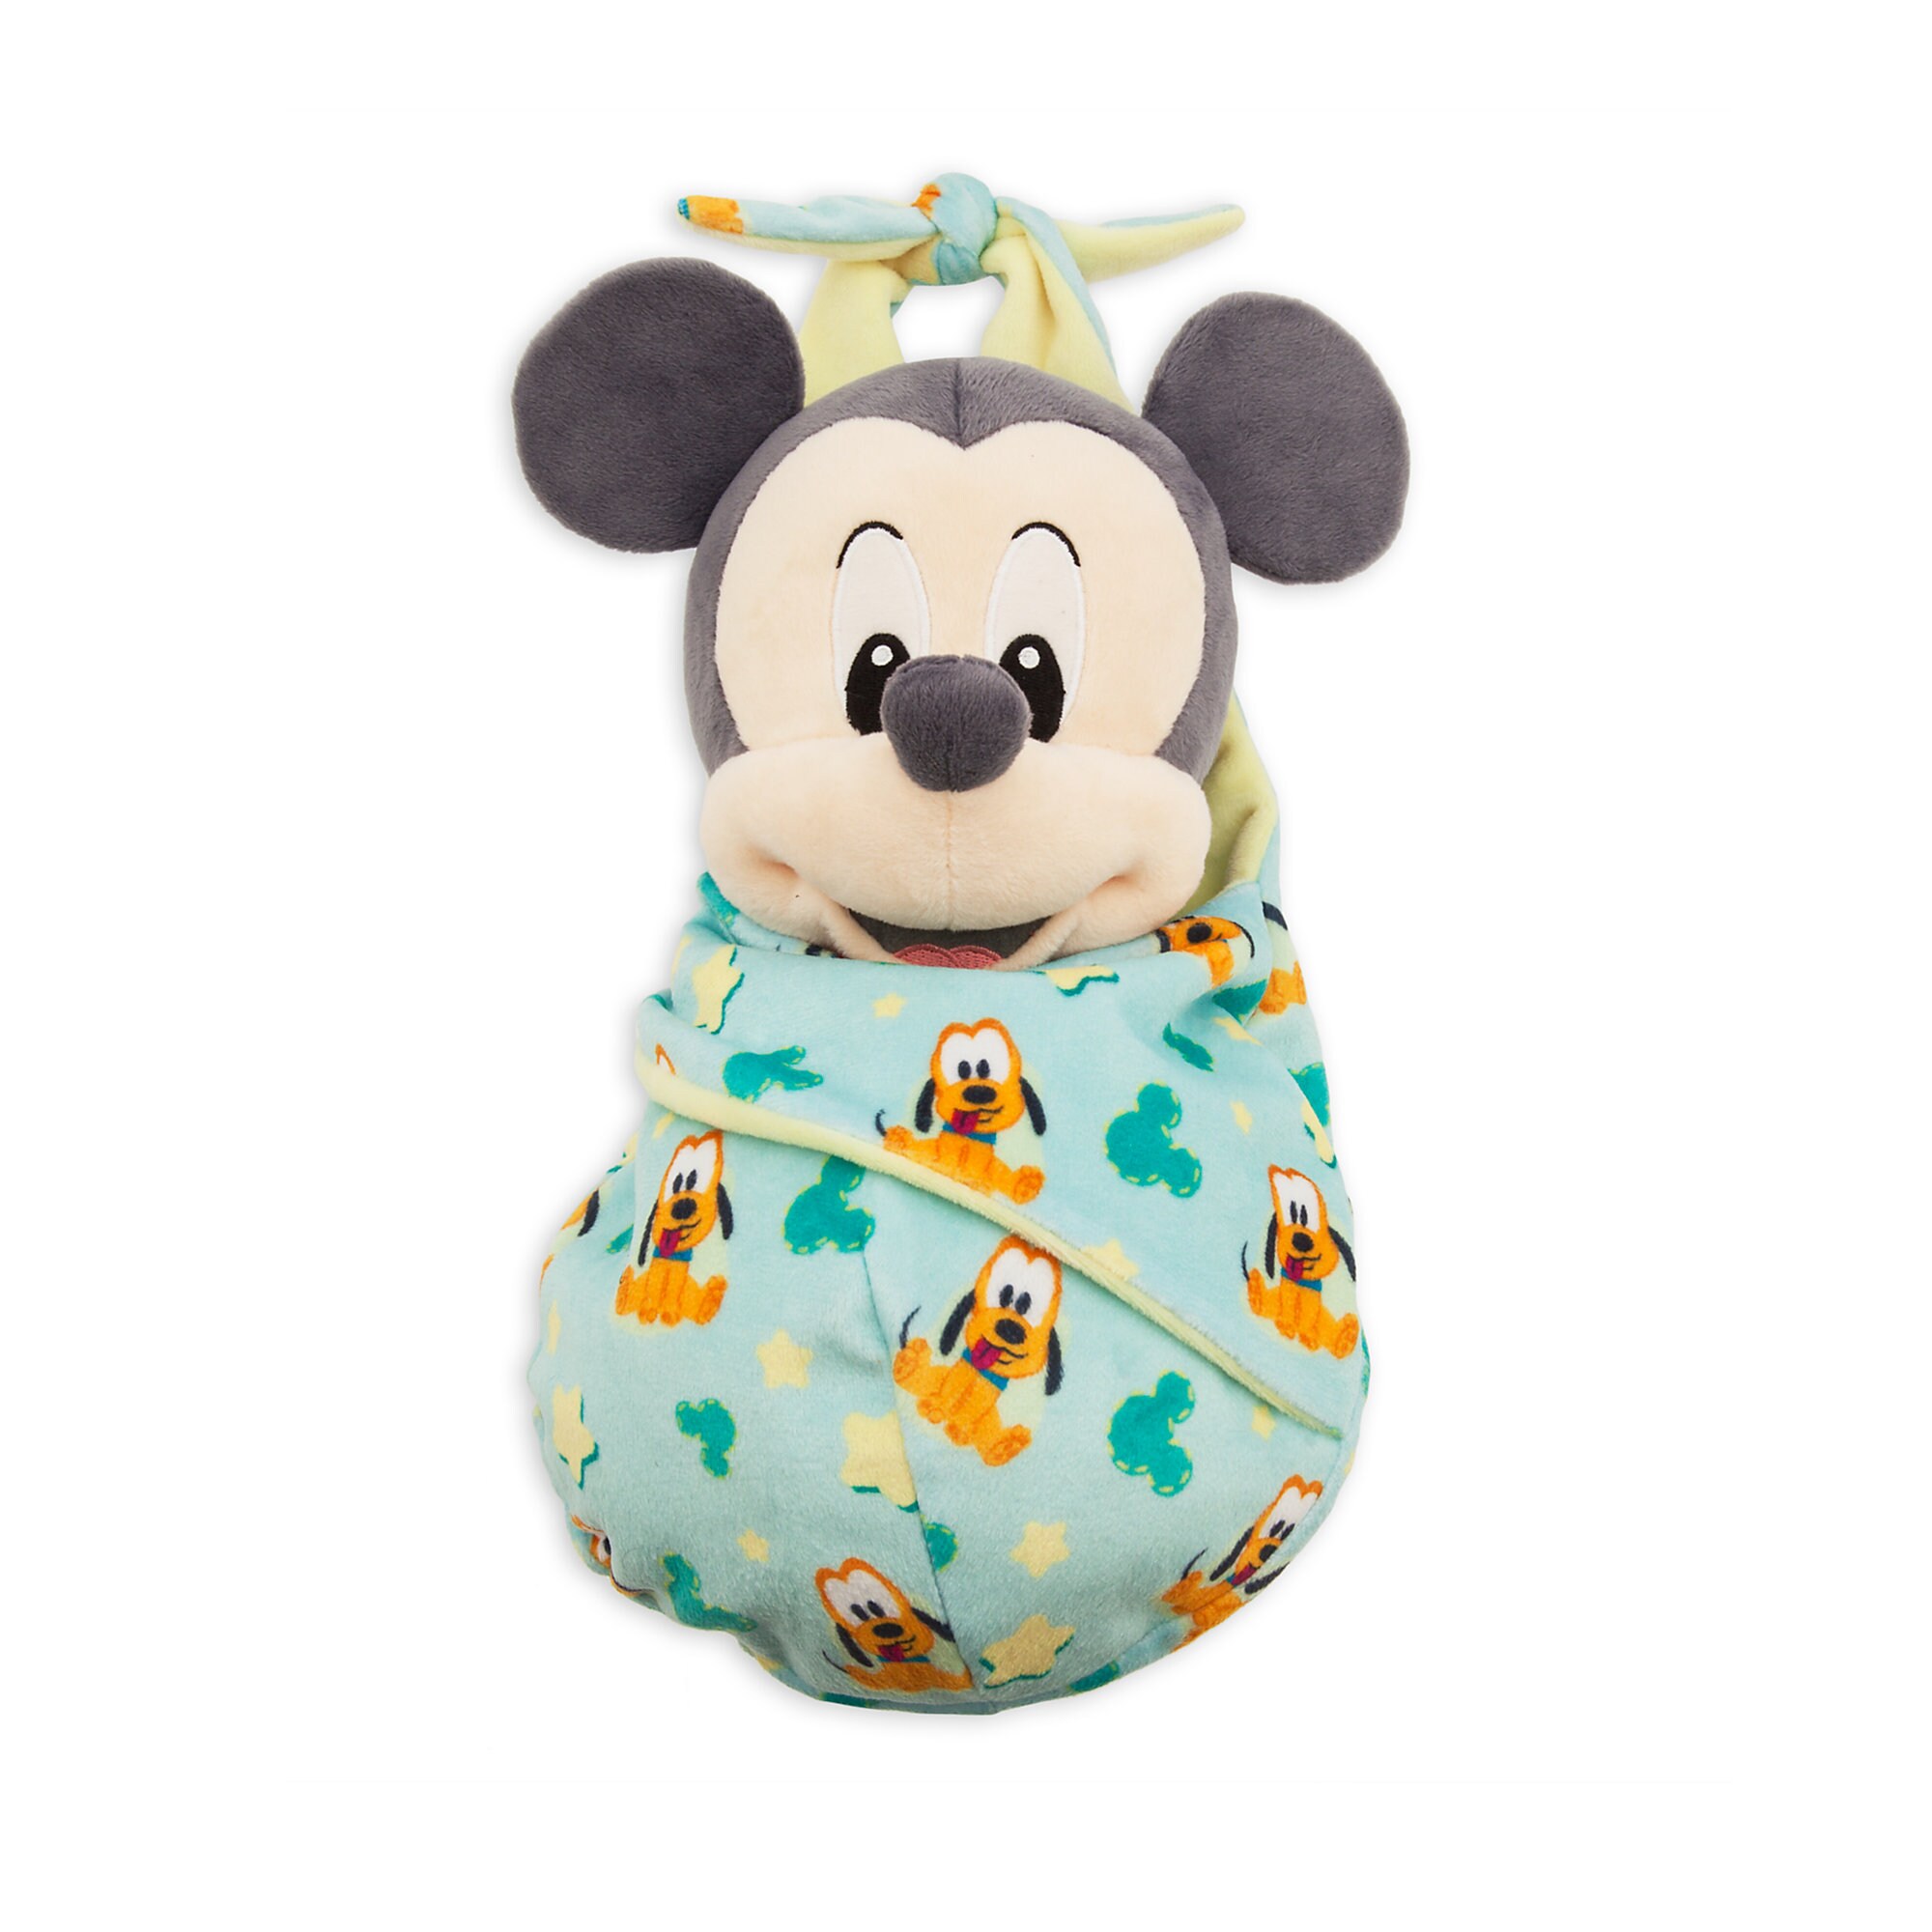 Mickey Mouse Plush in Pouch - Disney Babies - Small